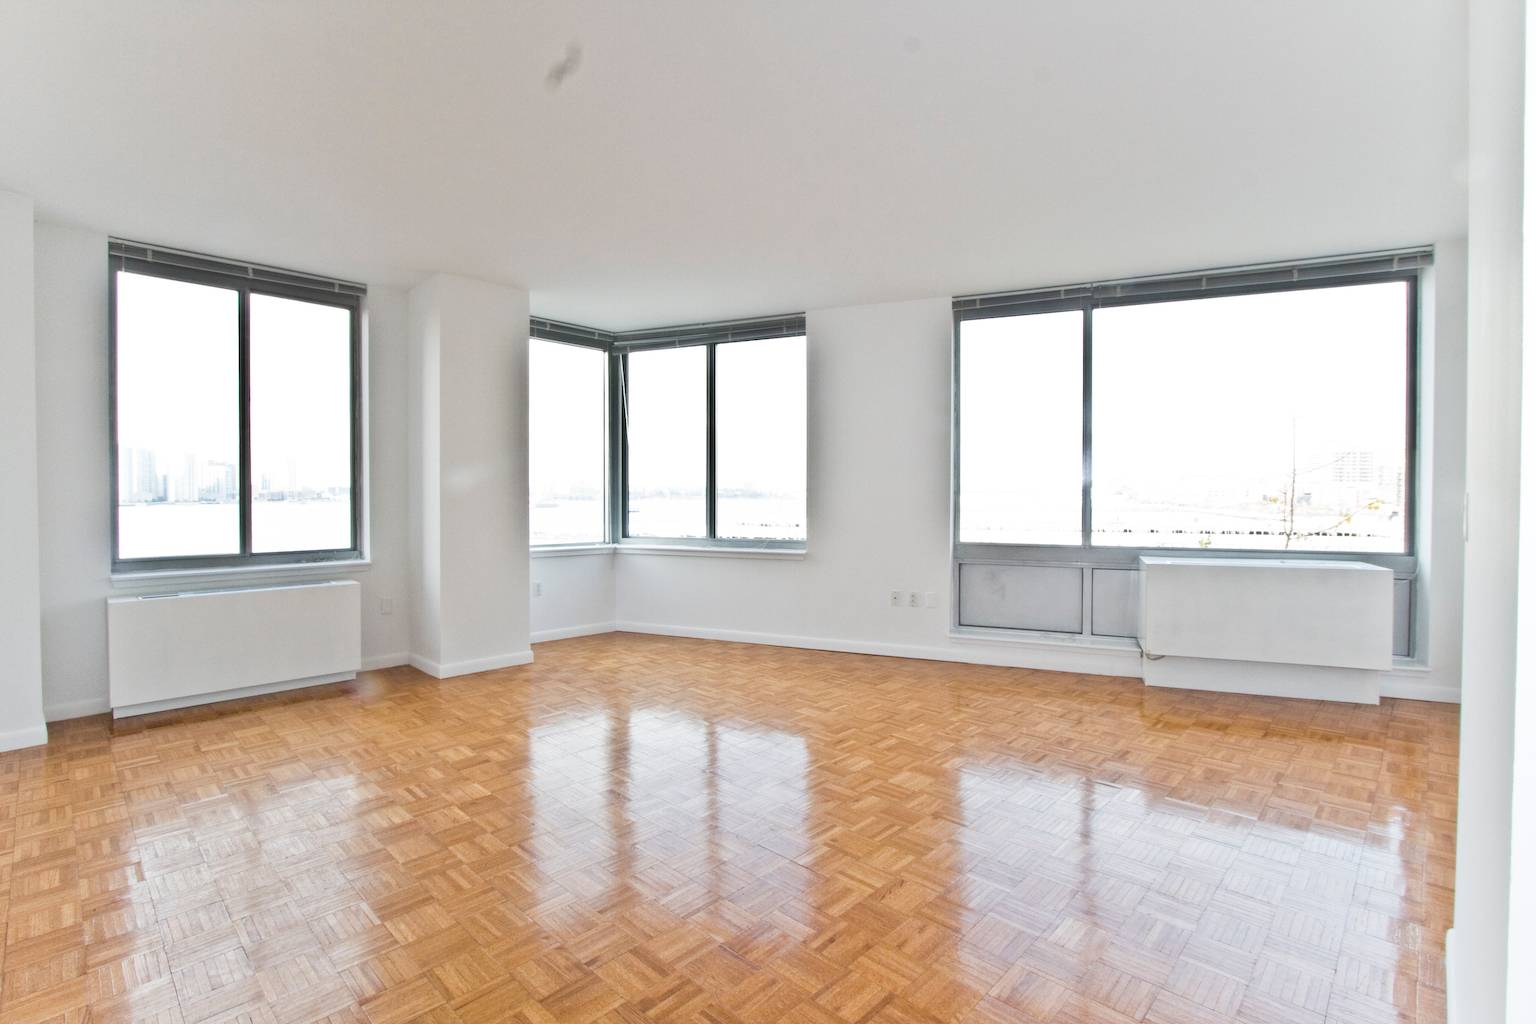 TriBeCa: Large 1 Bedroom - Over 800 Sq Ft - One Month Free